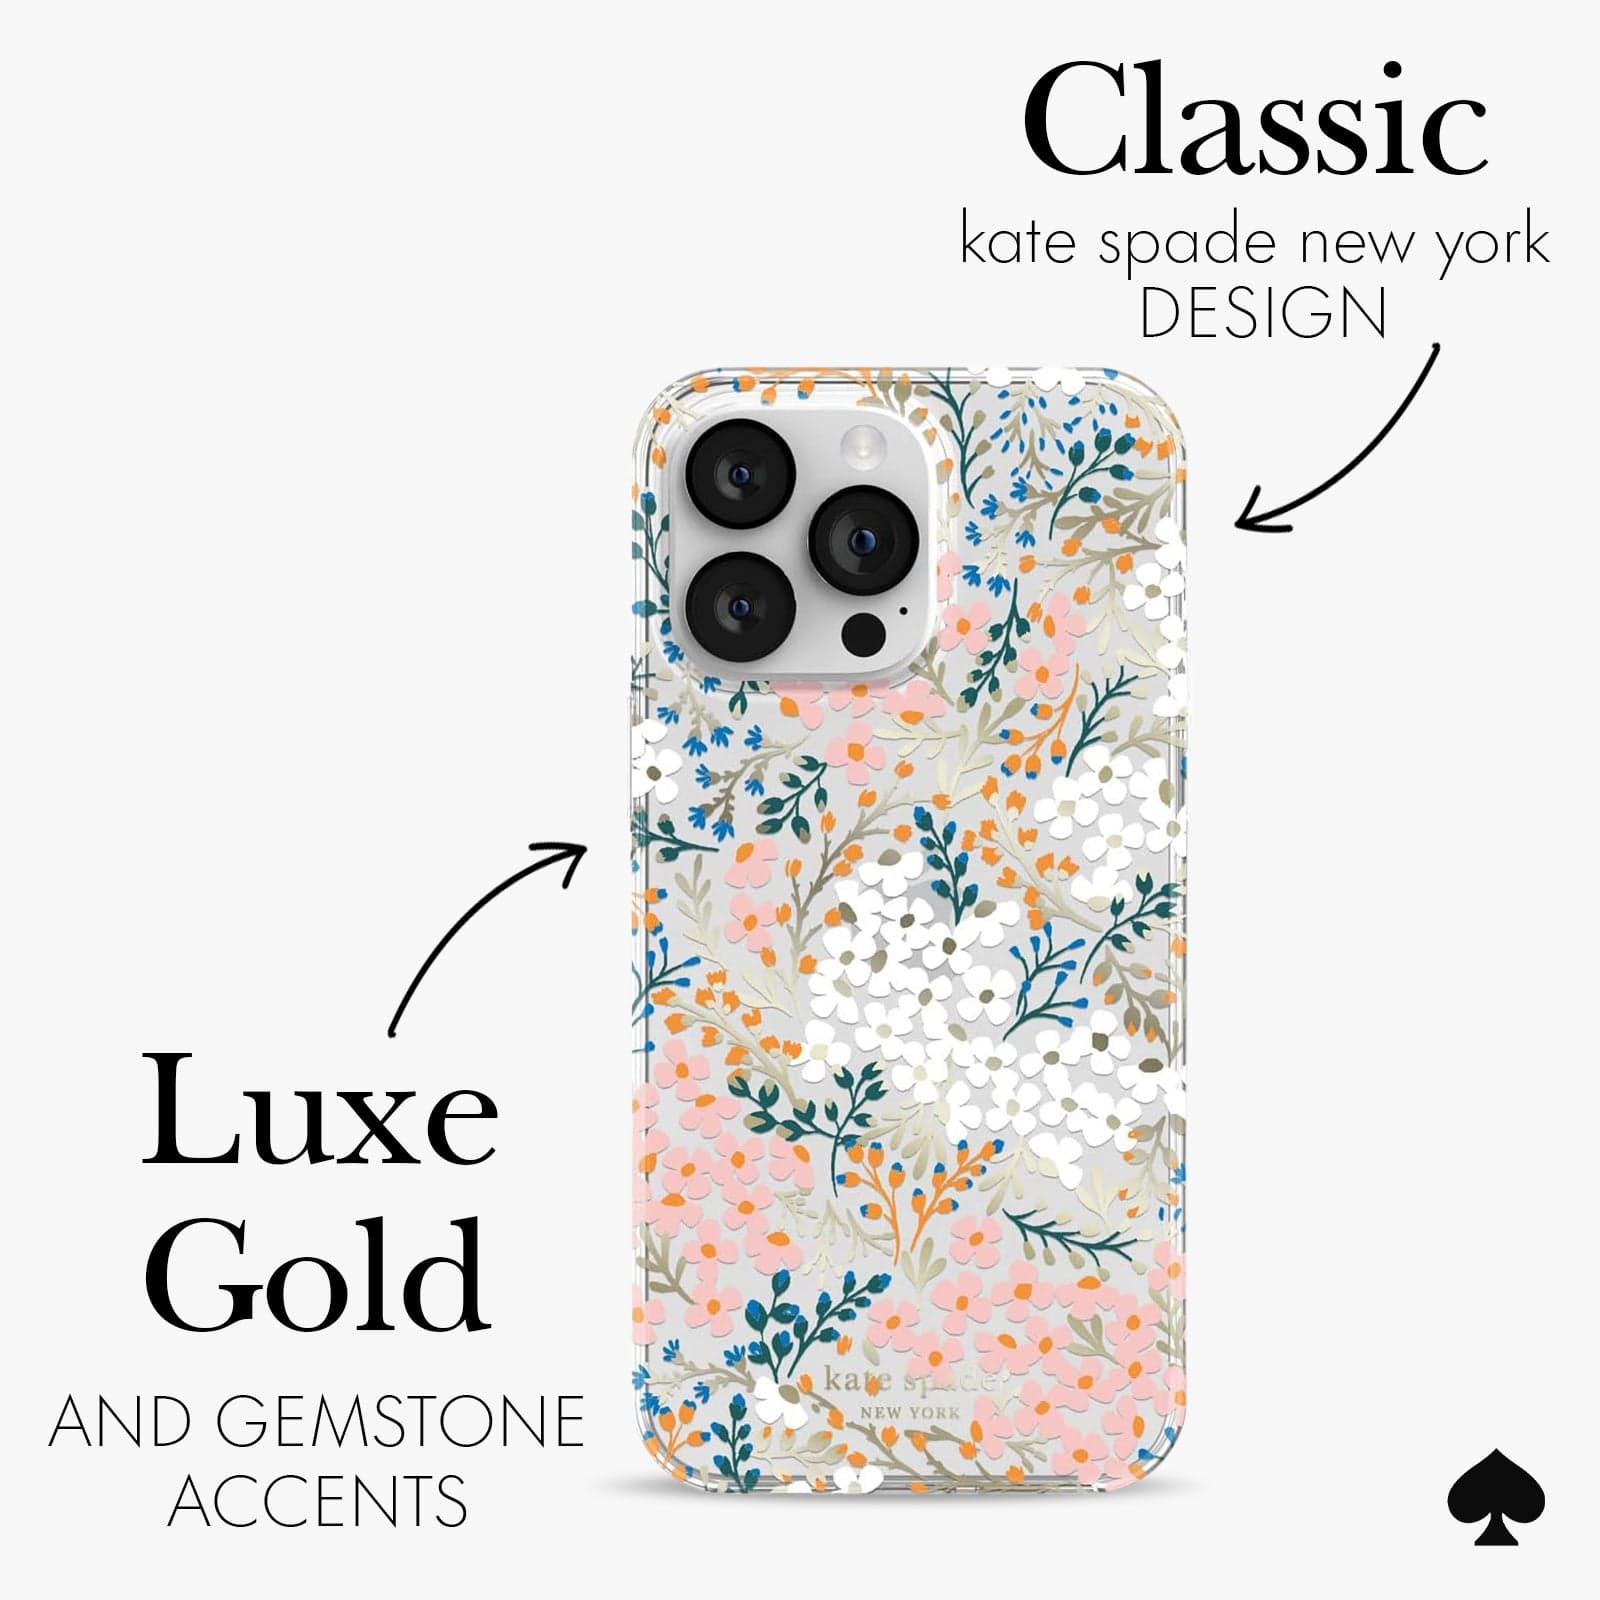 CLASSIC KATE SPADE NEW YORK DESIGN. LUXE GOLD AND GEMSTONE ACCENTS